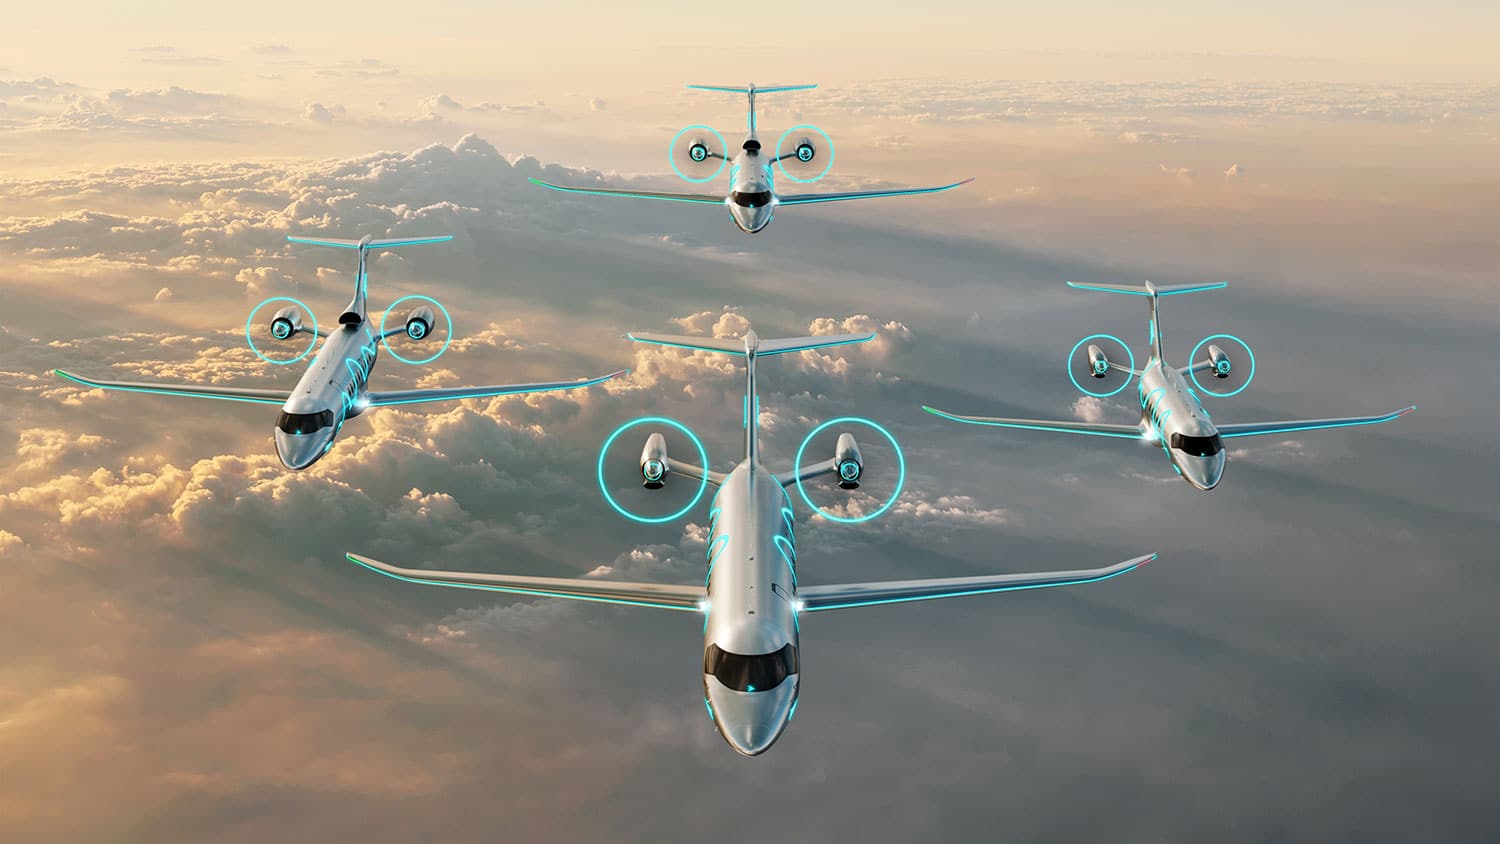 Embraer reveals new hybrid and hydrogen-powered sustainable aircraft concepts.